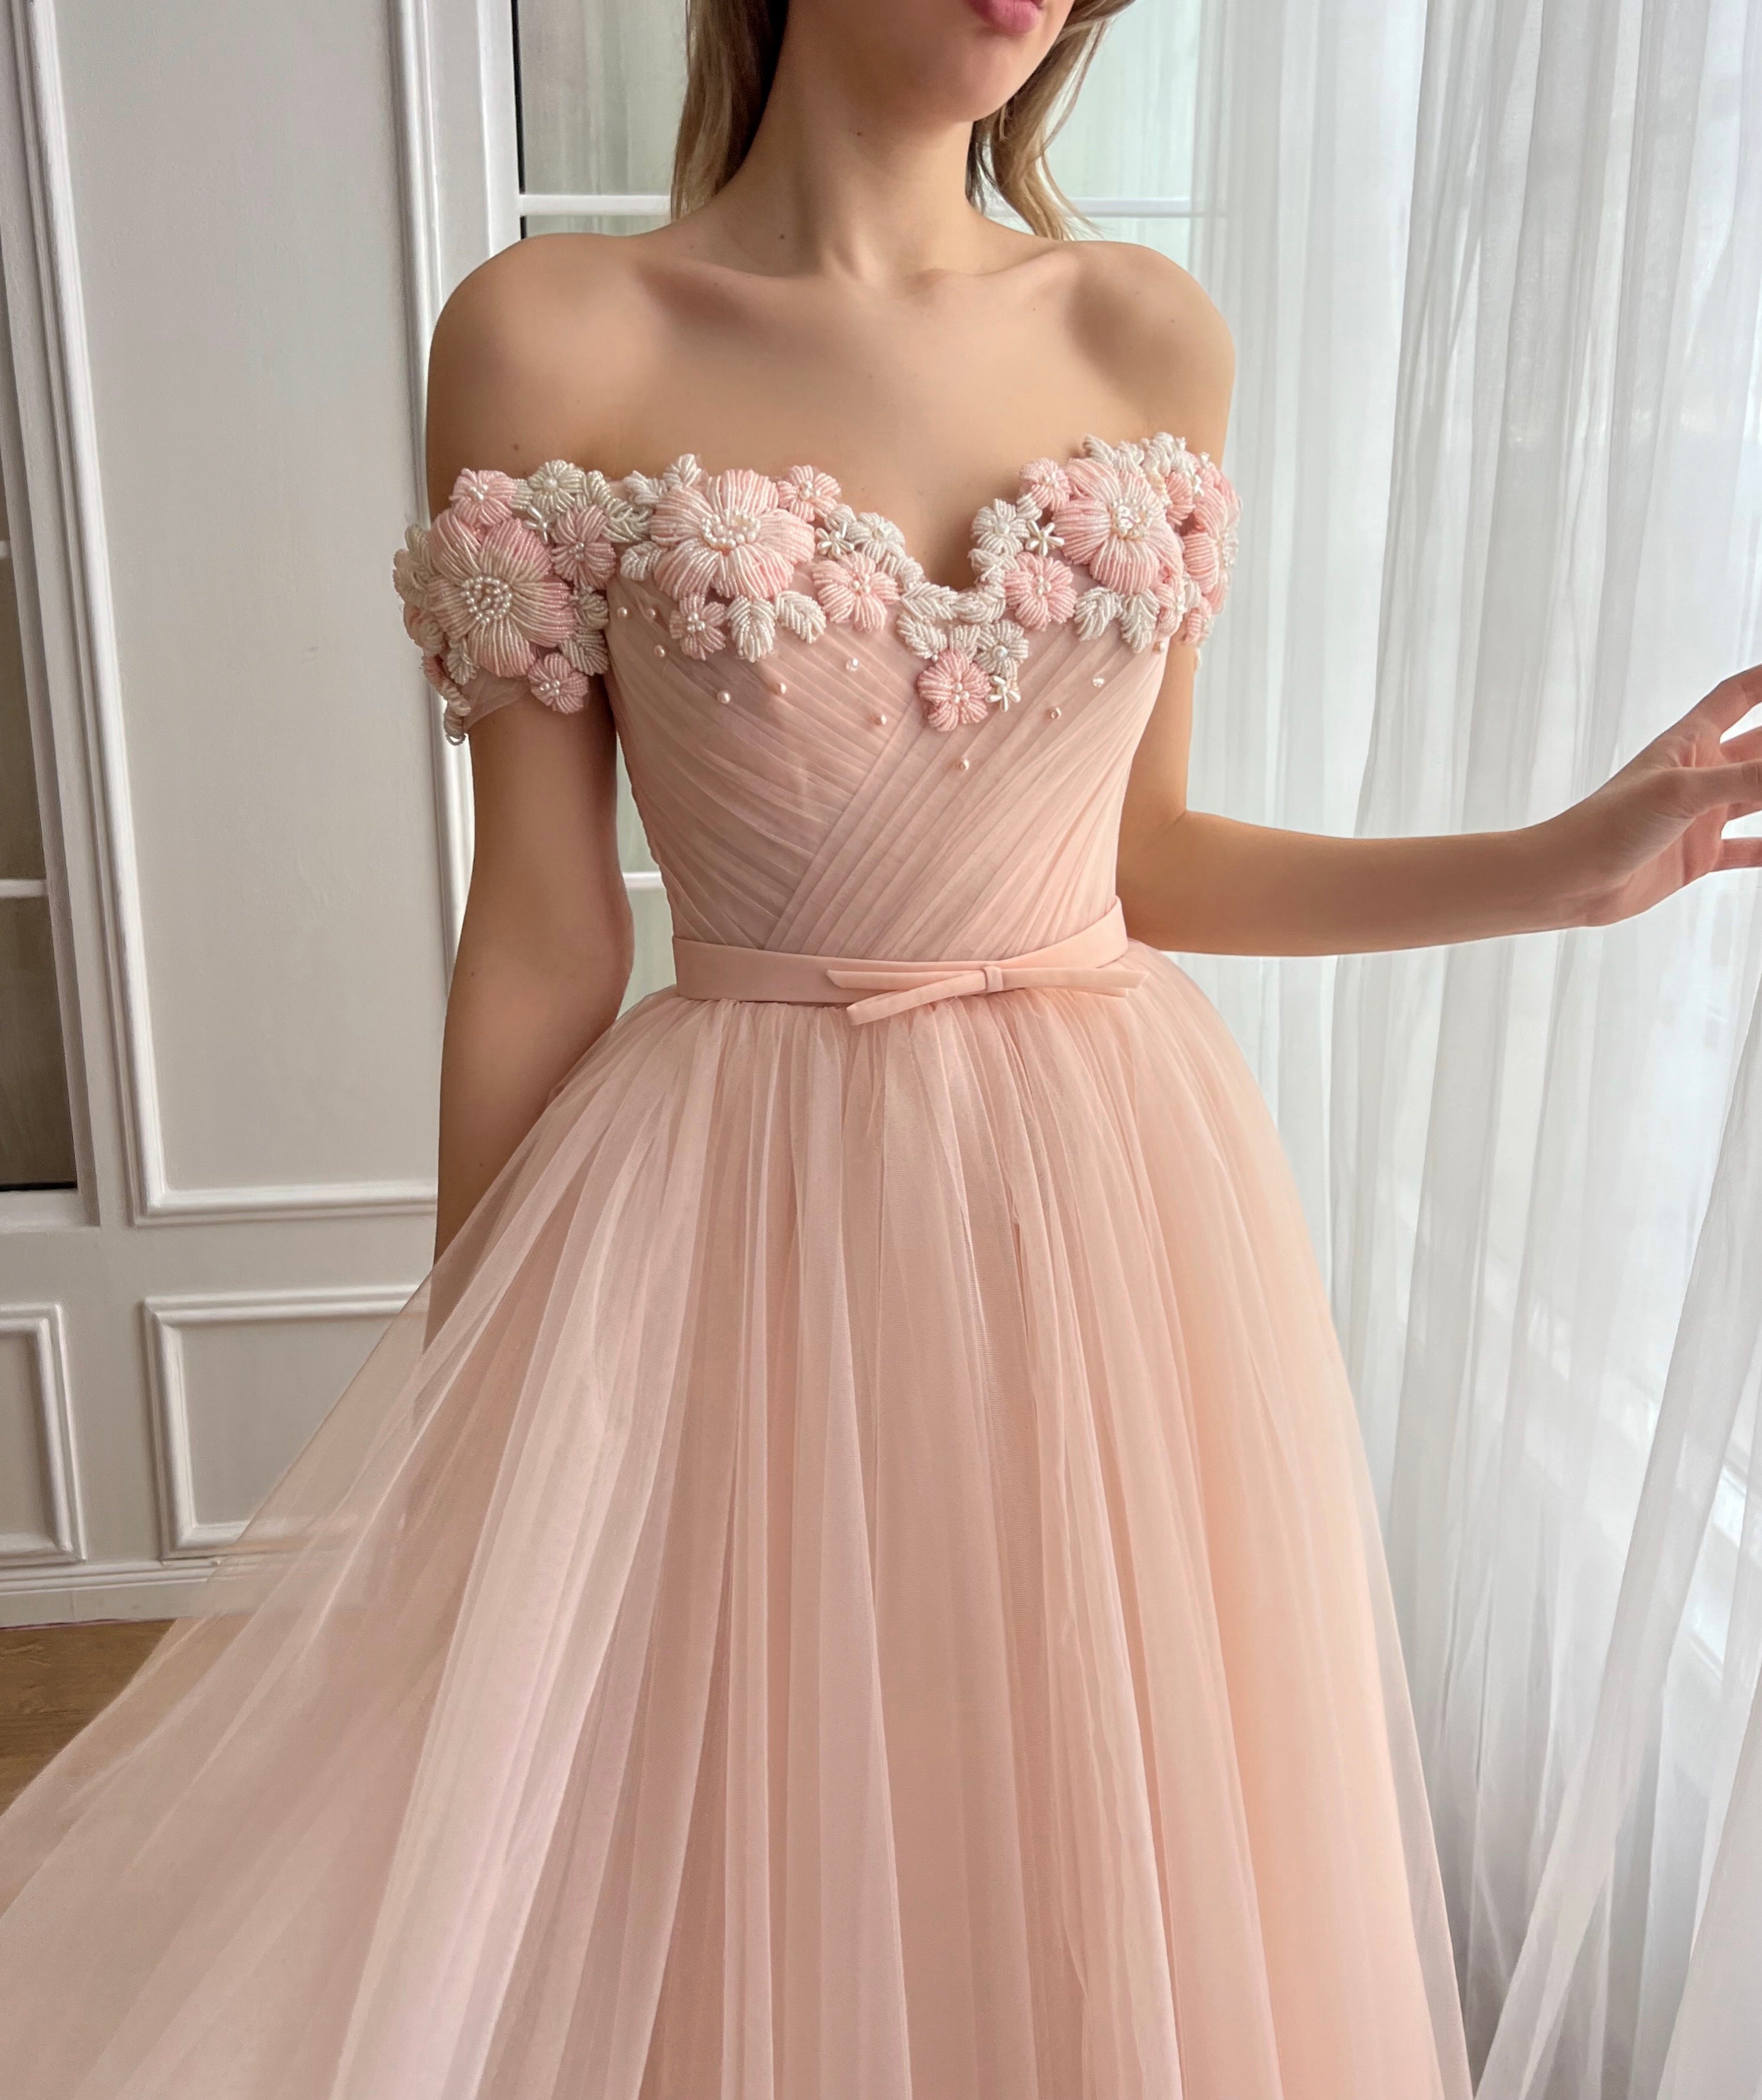 Peach midi dress with off the shoulder sleeves and embroidery